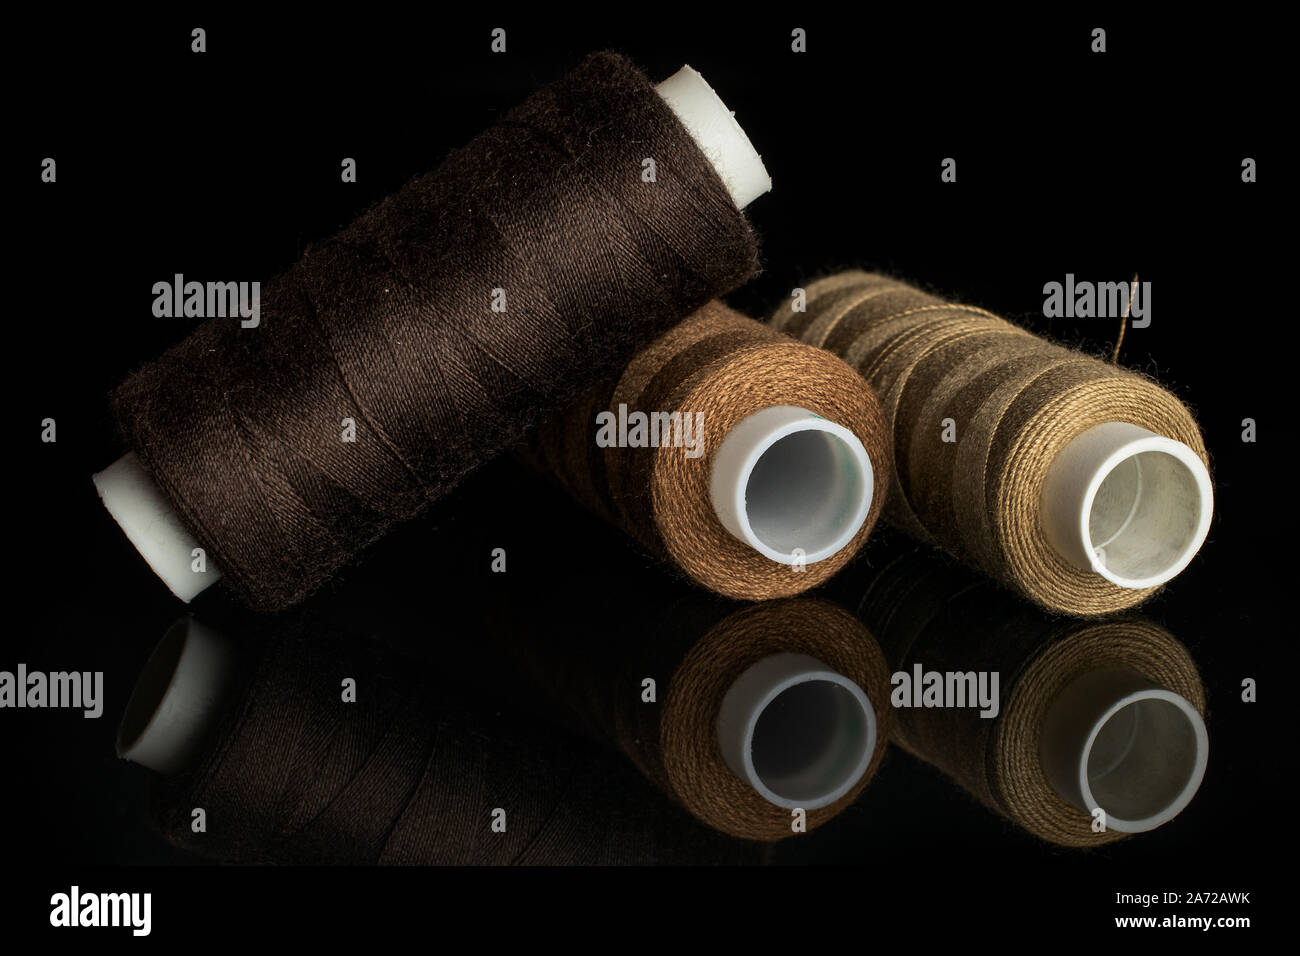 Group of three whole haberdashery item brown thread spools isolated on black glass Stock Photo